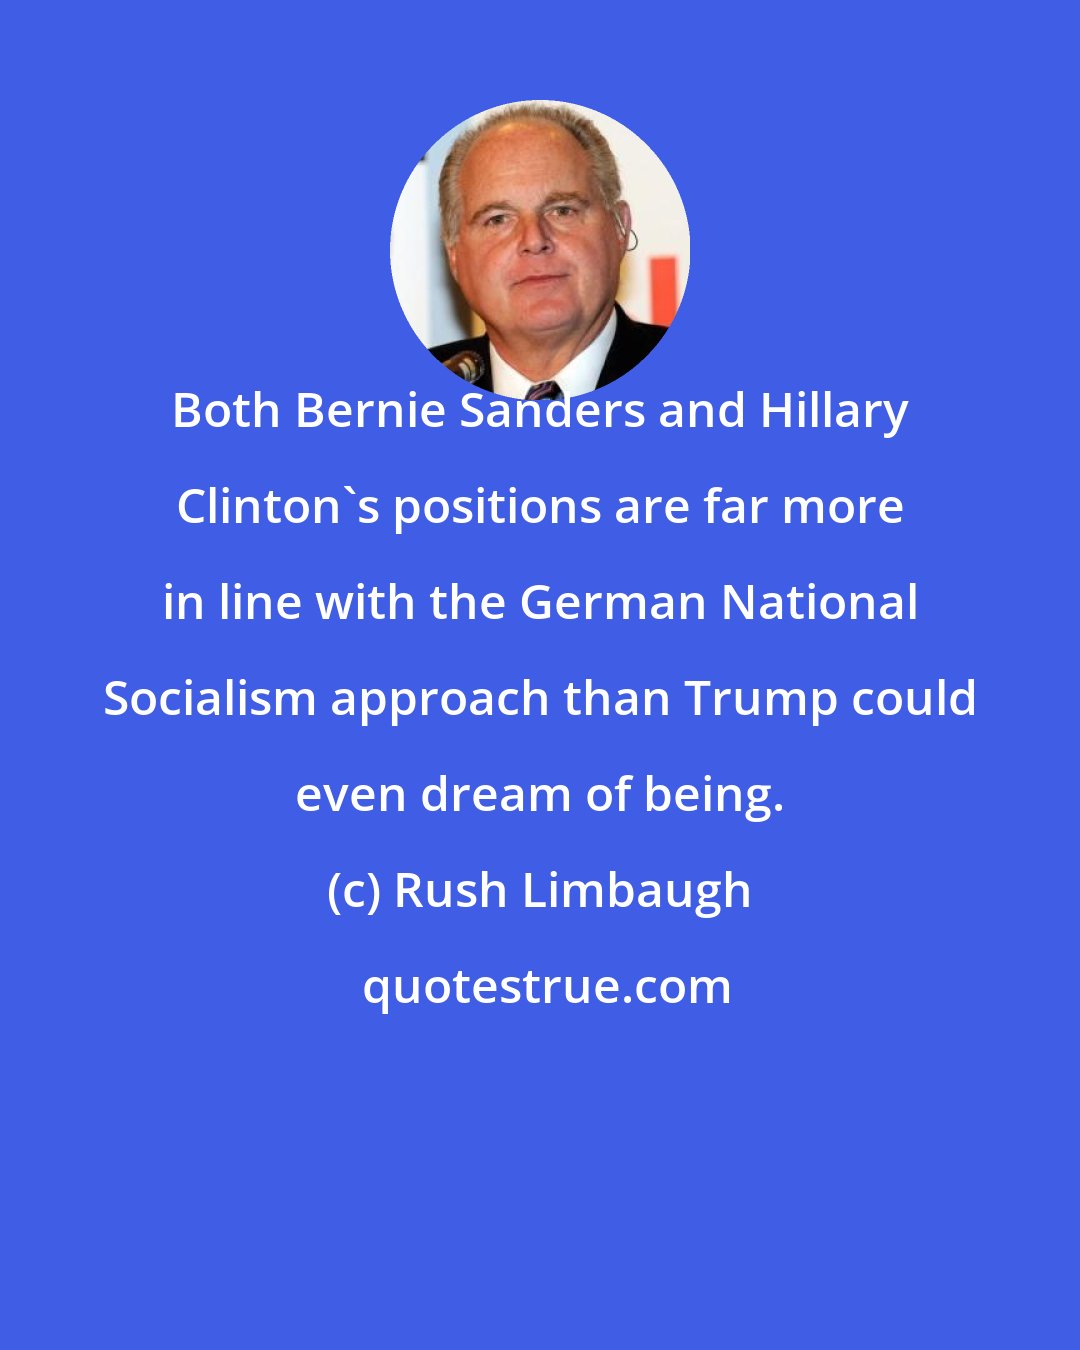 Rush Limbaugh: Both Bernie Sanders and Hillary Clinton's positions are far more in line with the German National Socialism approach than Trump could even dream of being.